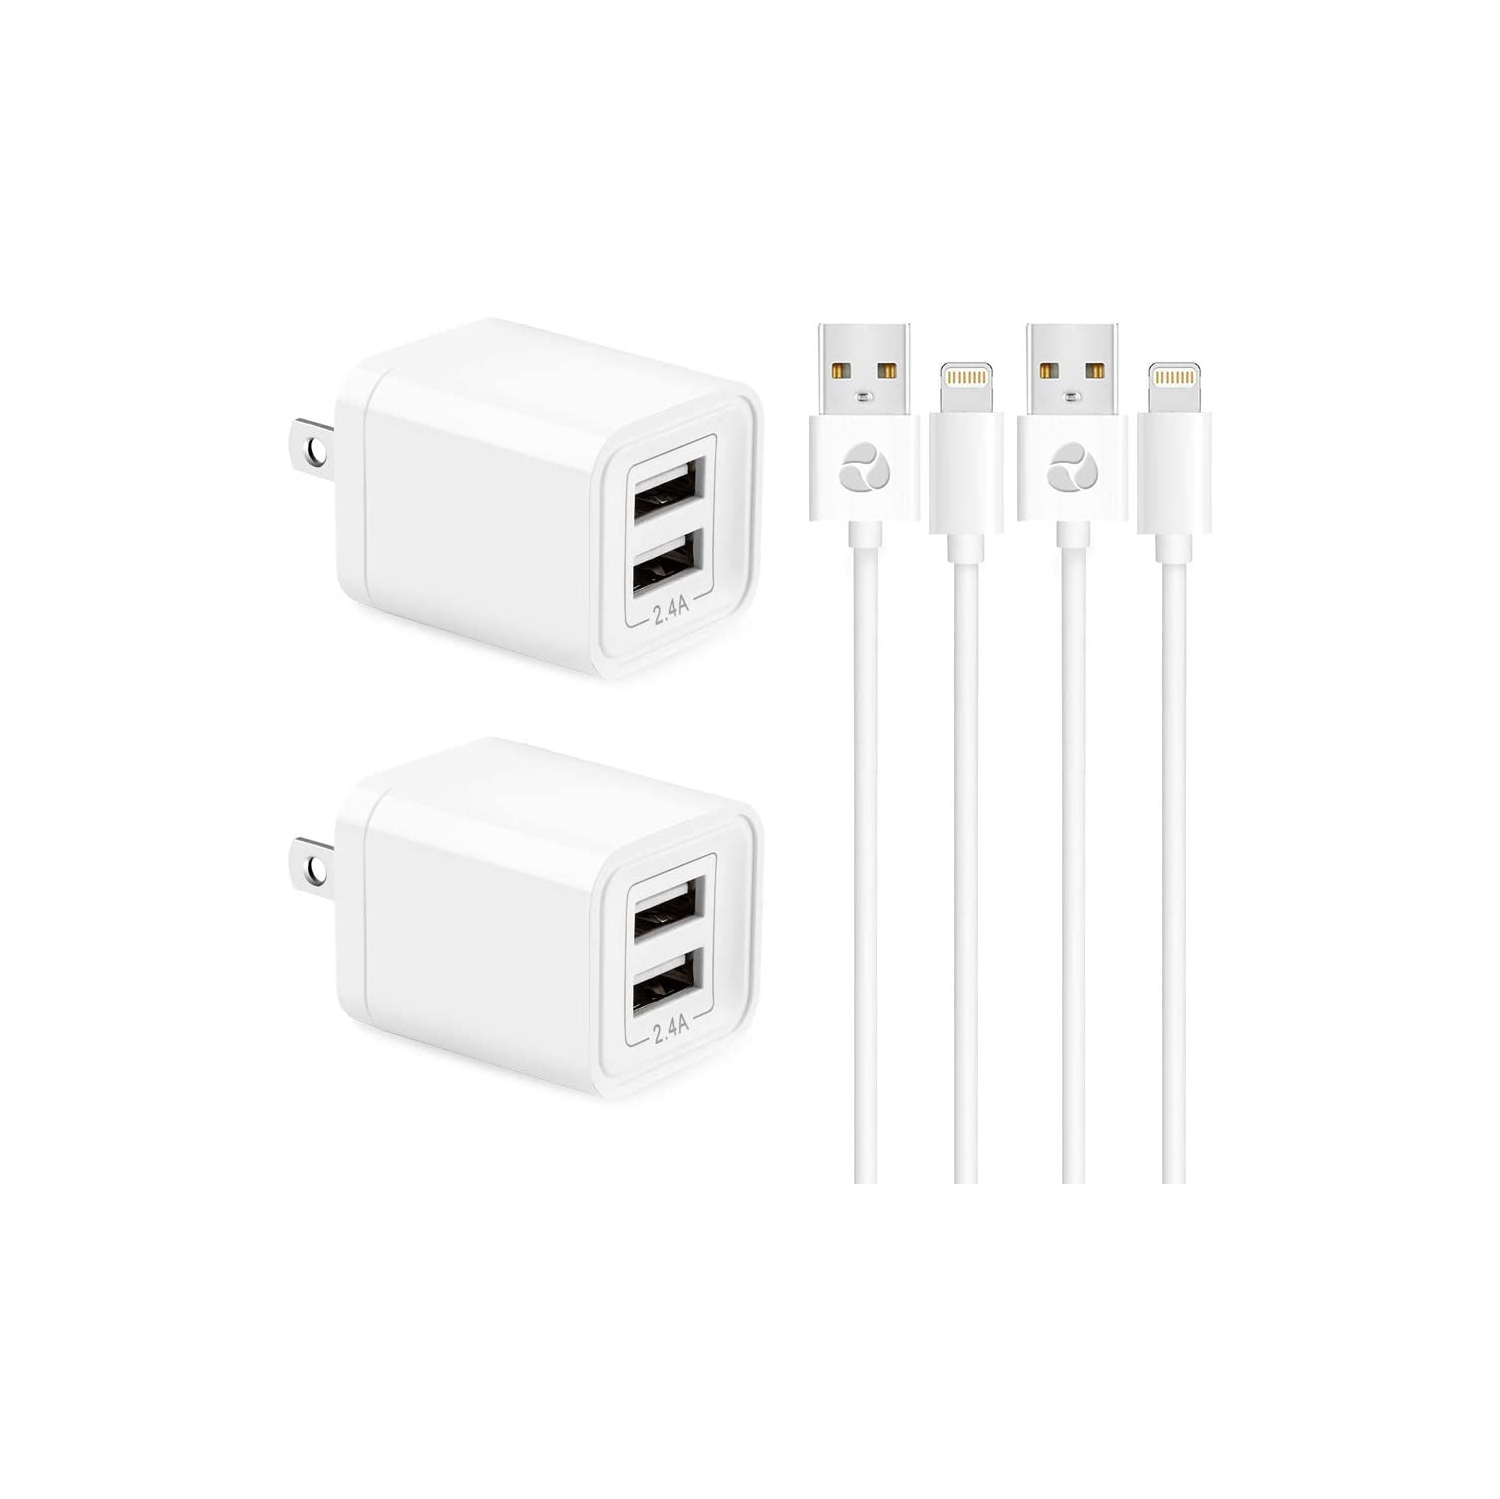 CABLESHARK USB Wall Charger, 2.4A Dual Port USB Power Adapter with 3FT Lightning to USB Cable (2 Pack)